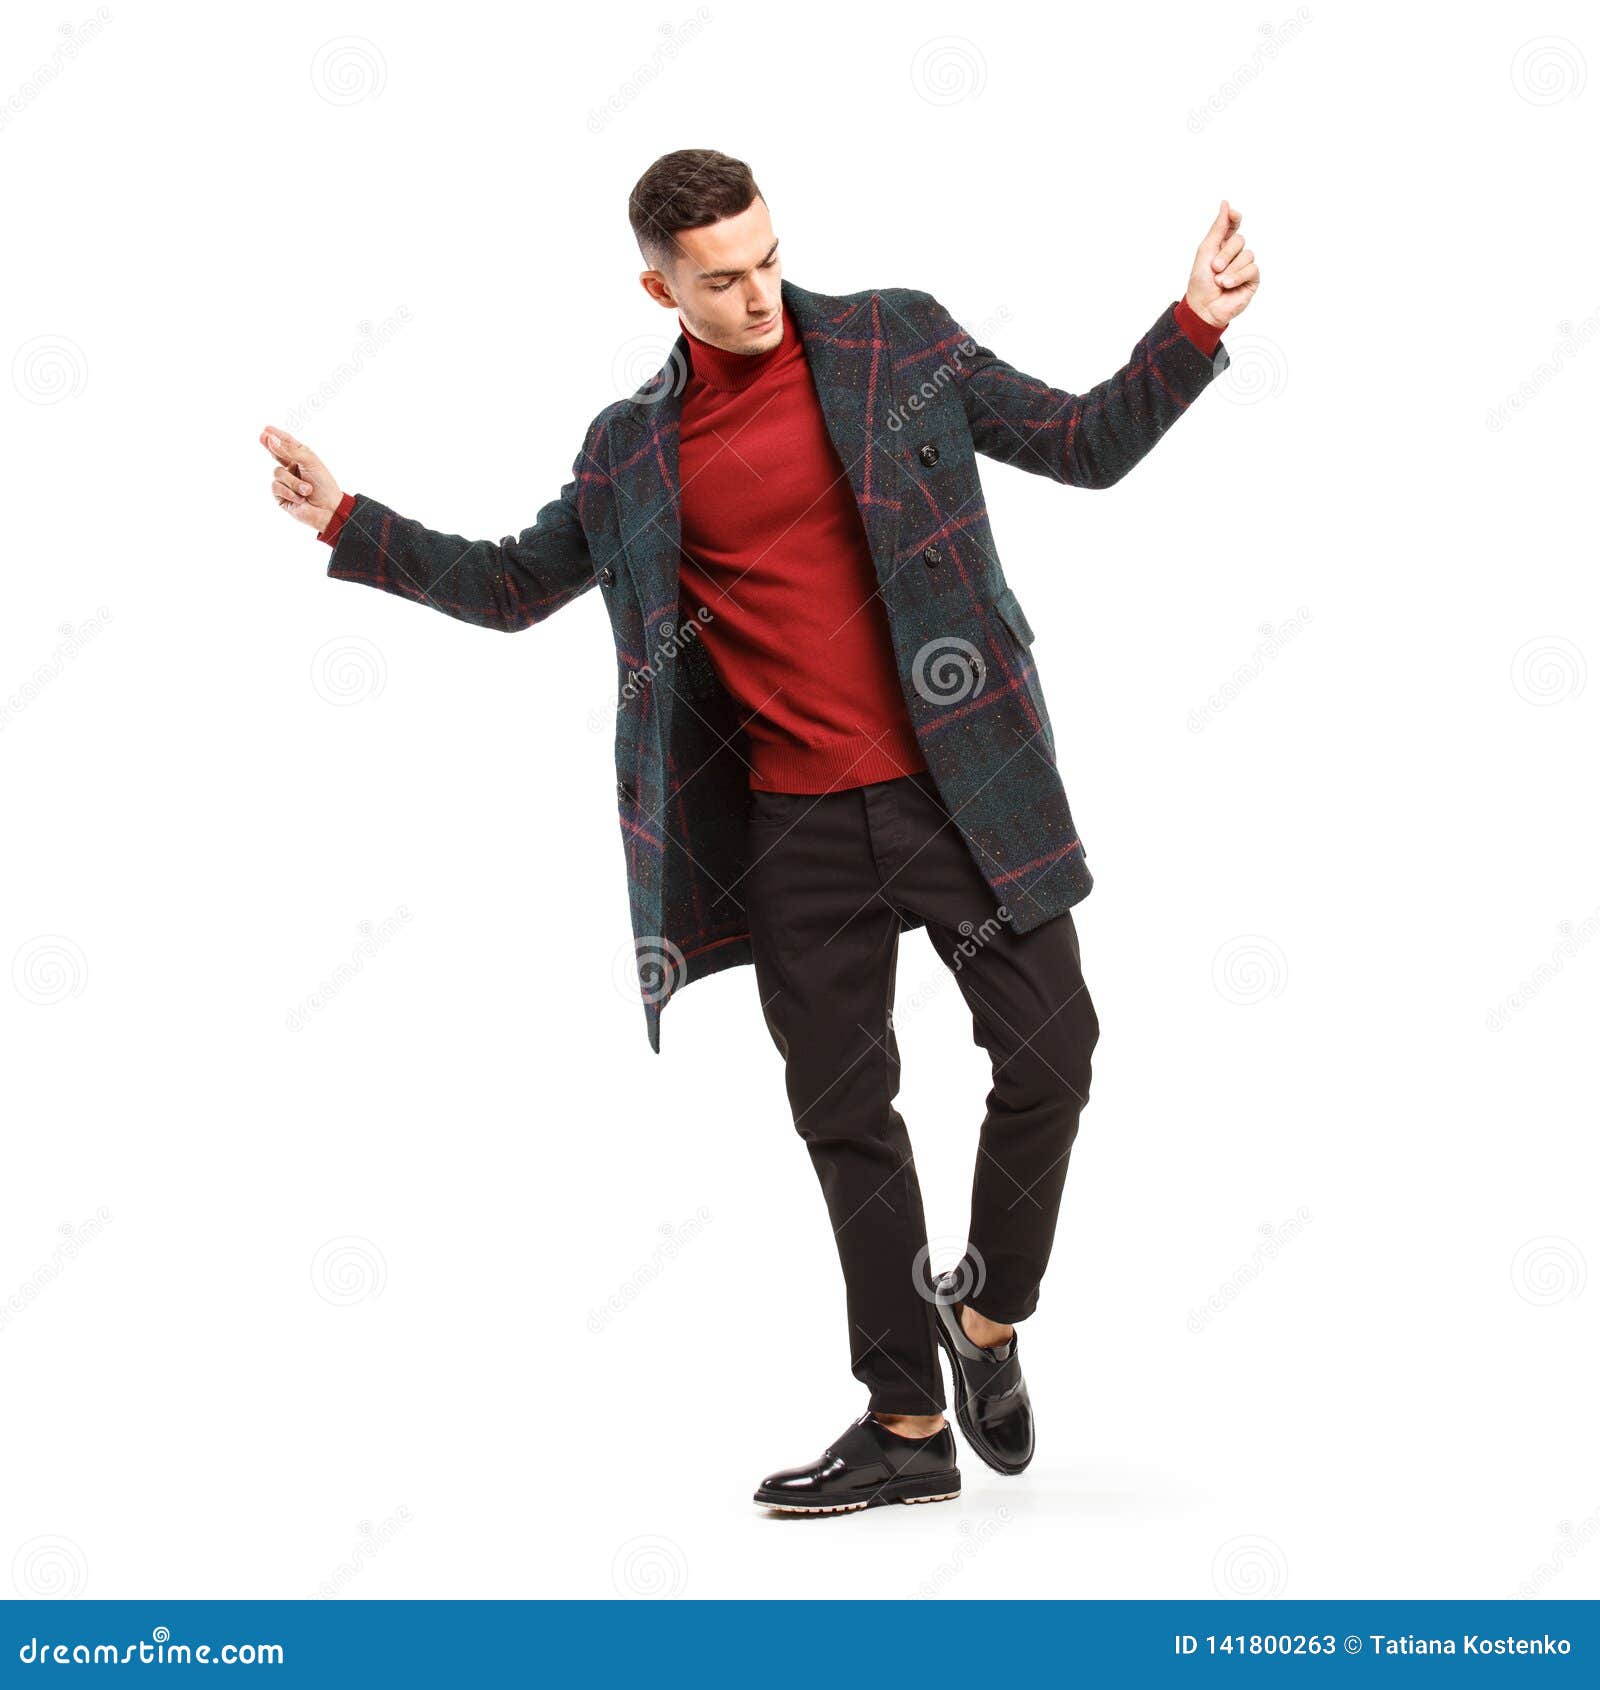 565 Attractive Male Model Holding Coat Posing Stock Photos - Free &  Royalty-Free Stock Photos from Dreamstime